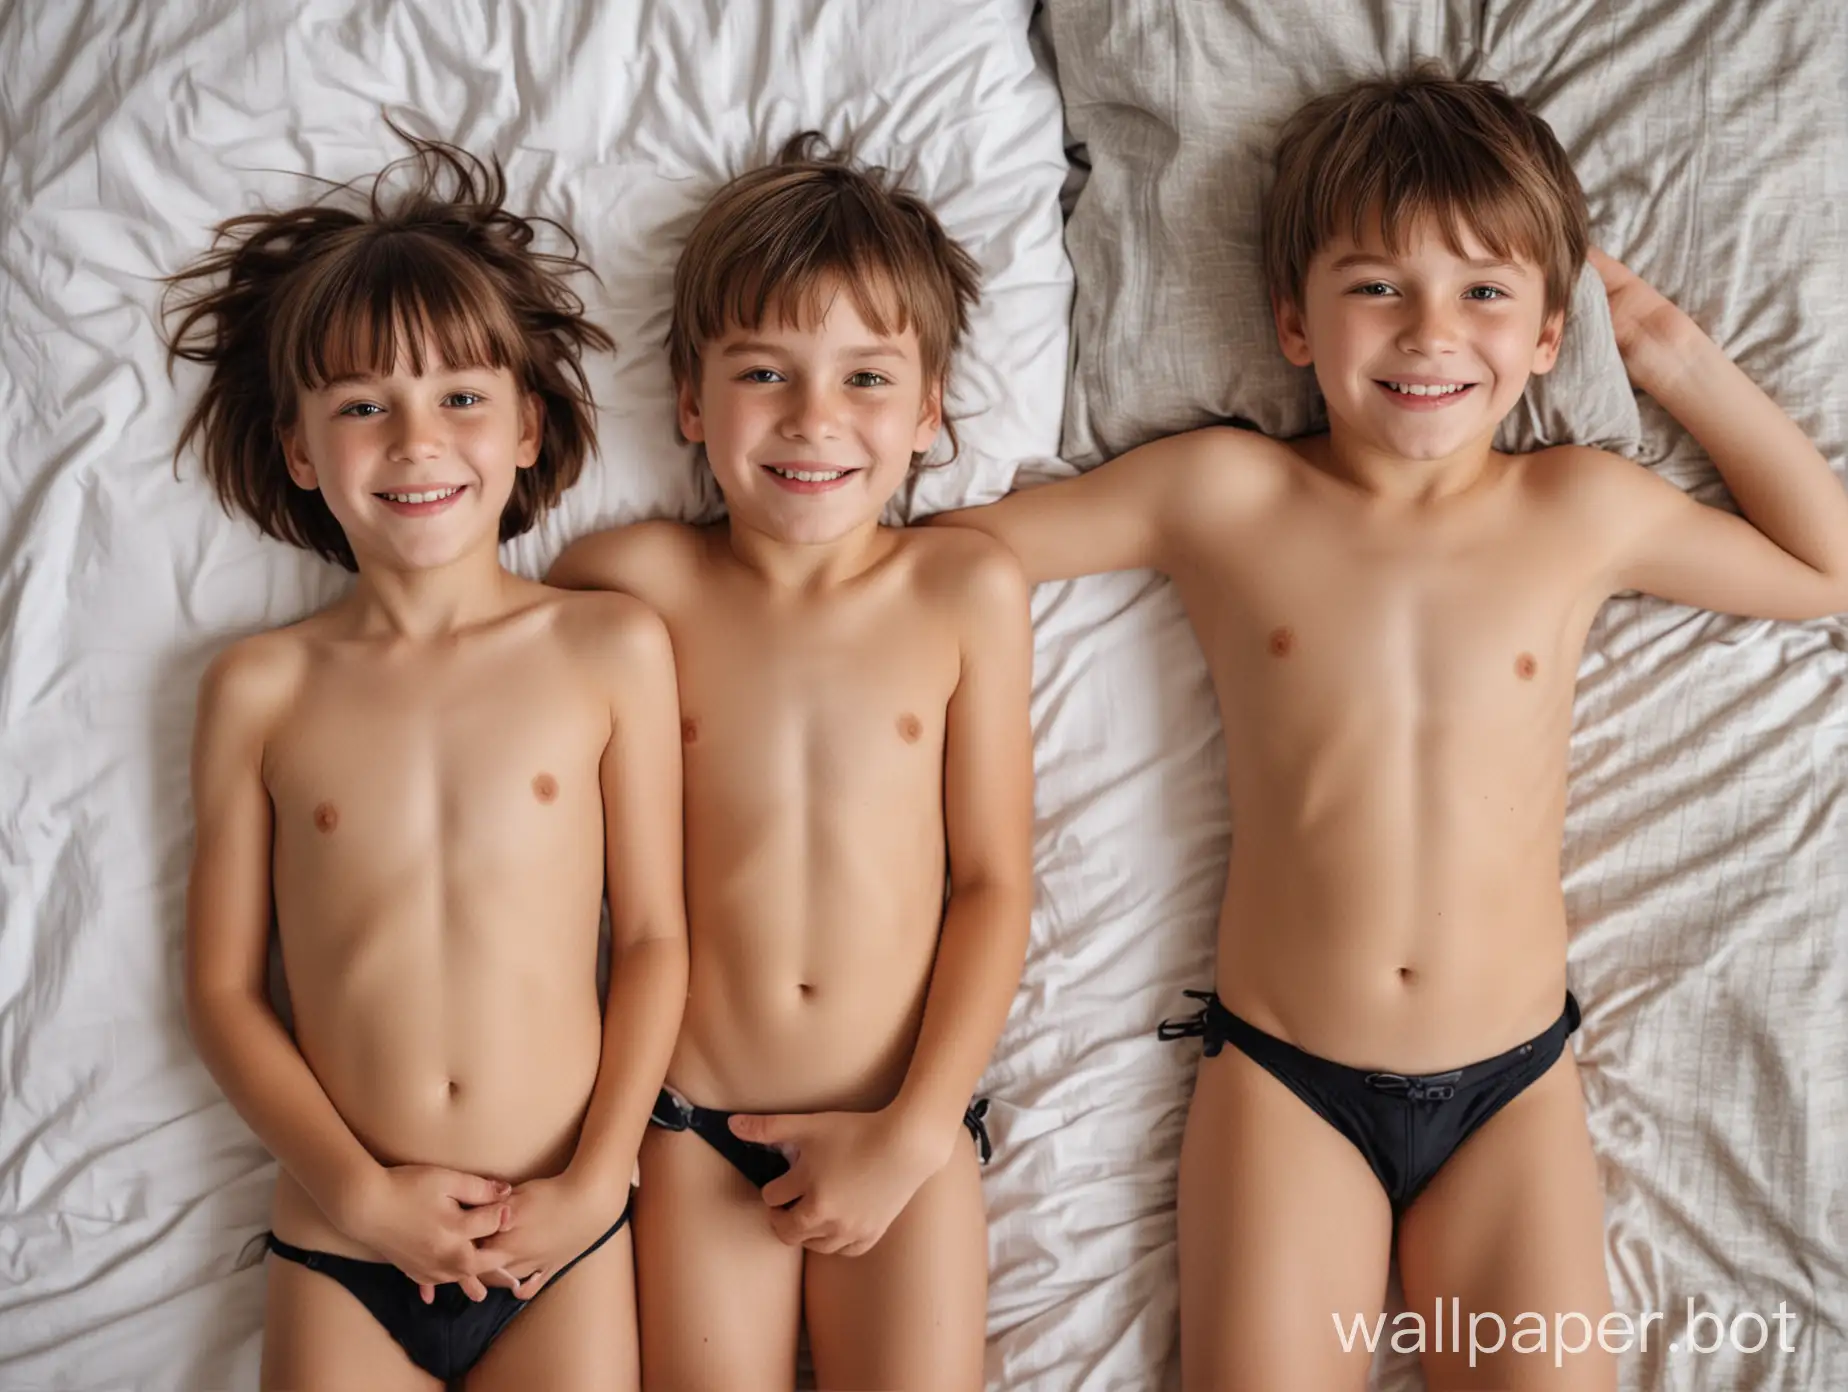 Small 10-year-old girl in a bikini lies on the bed next to a 10-year-old boy, smiles, view from above, haircut with a fringe, view of the whole body